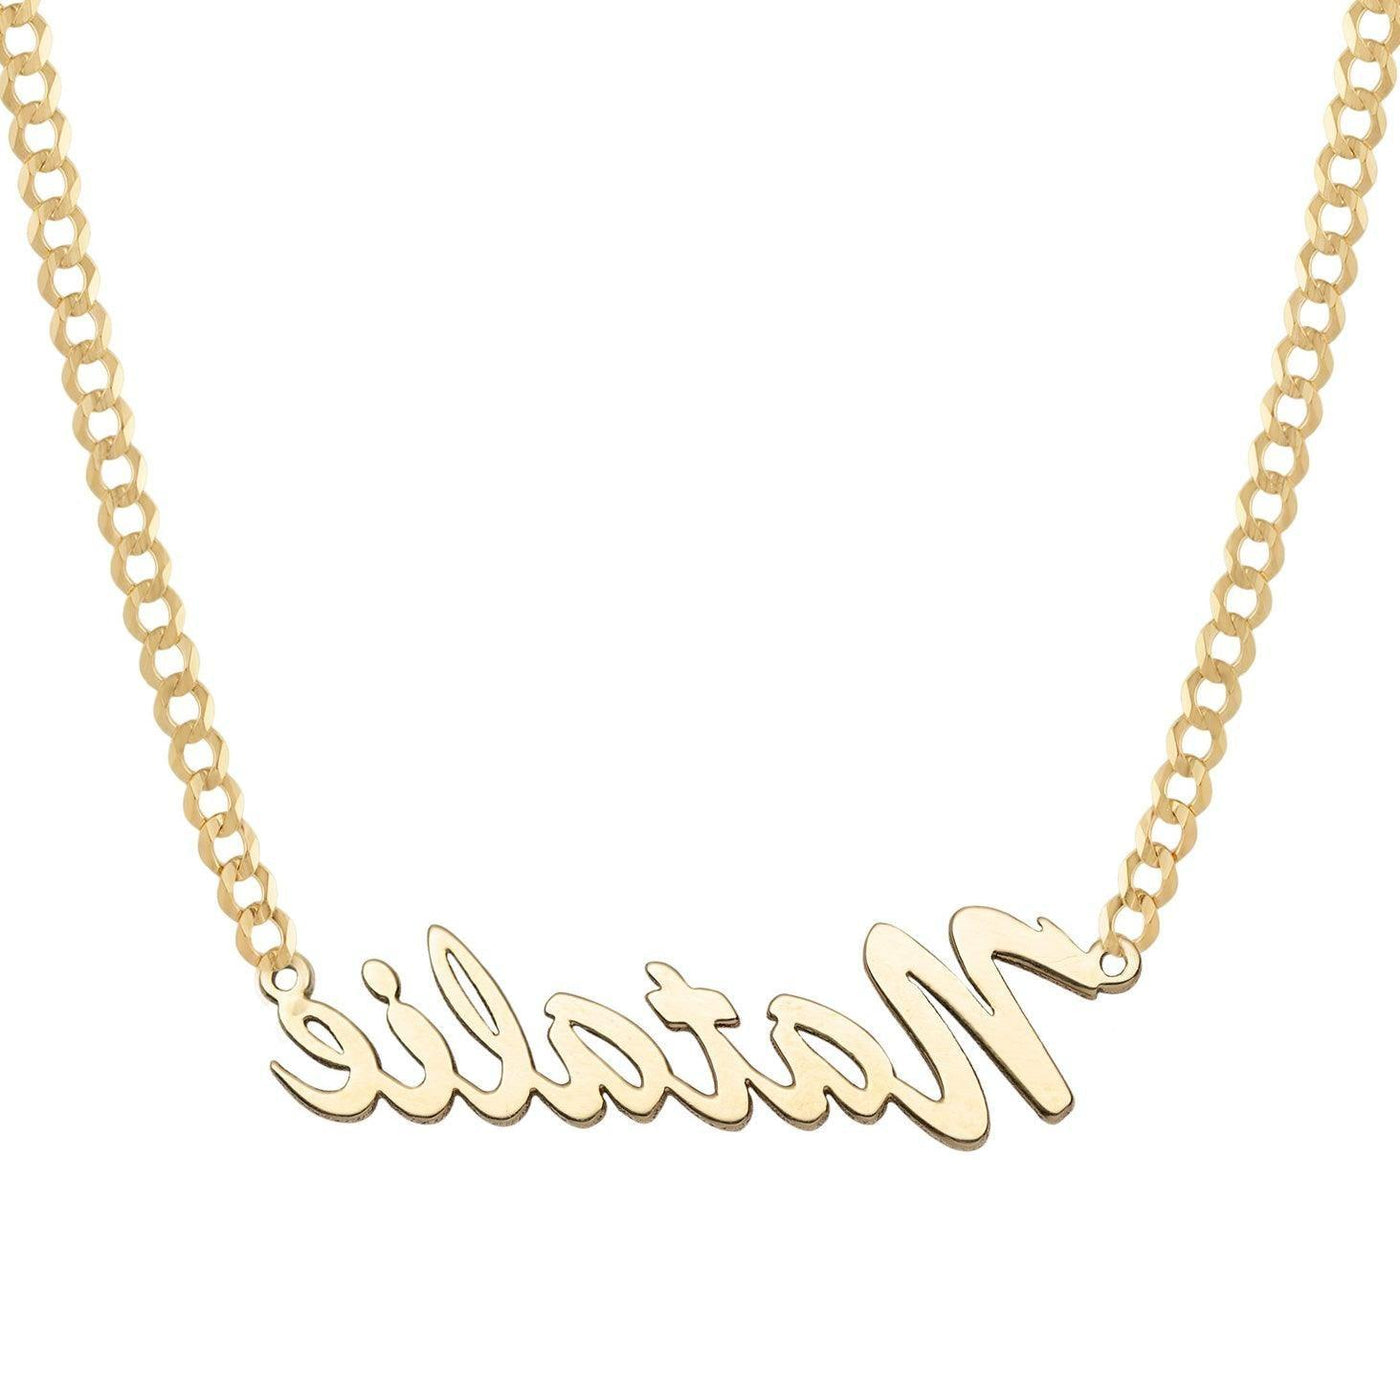 Ladies Script Name Plate Necklace 14K Gold - Style 85 - bayamjewelry